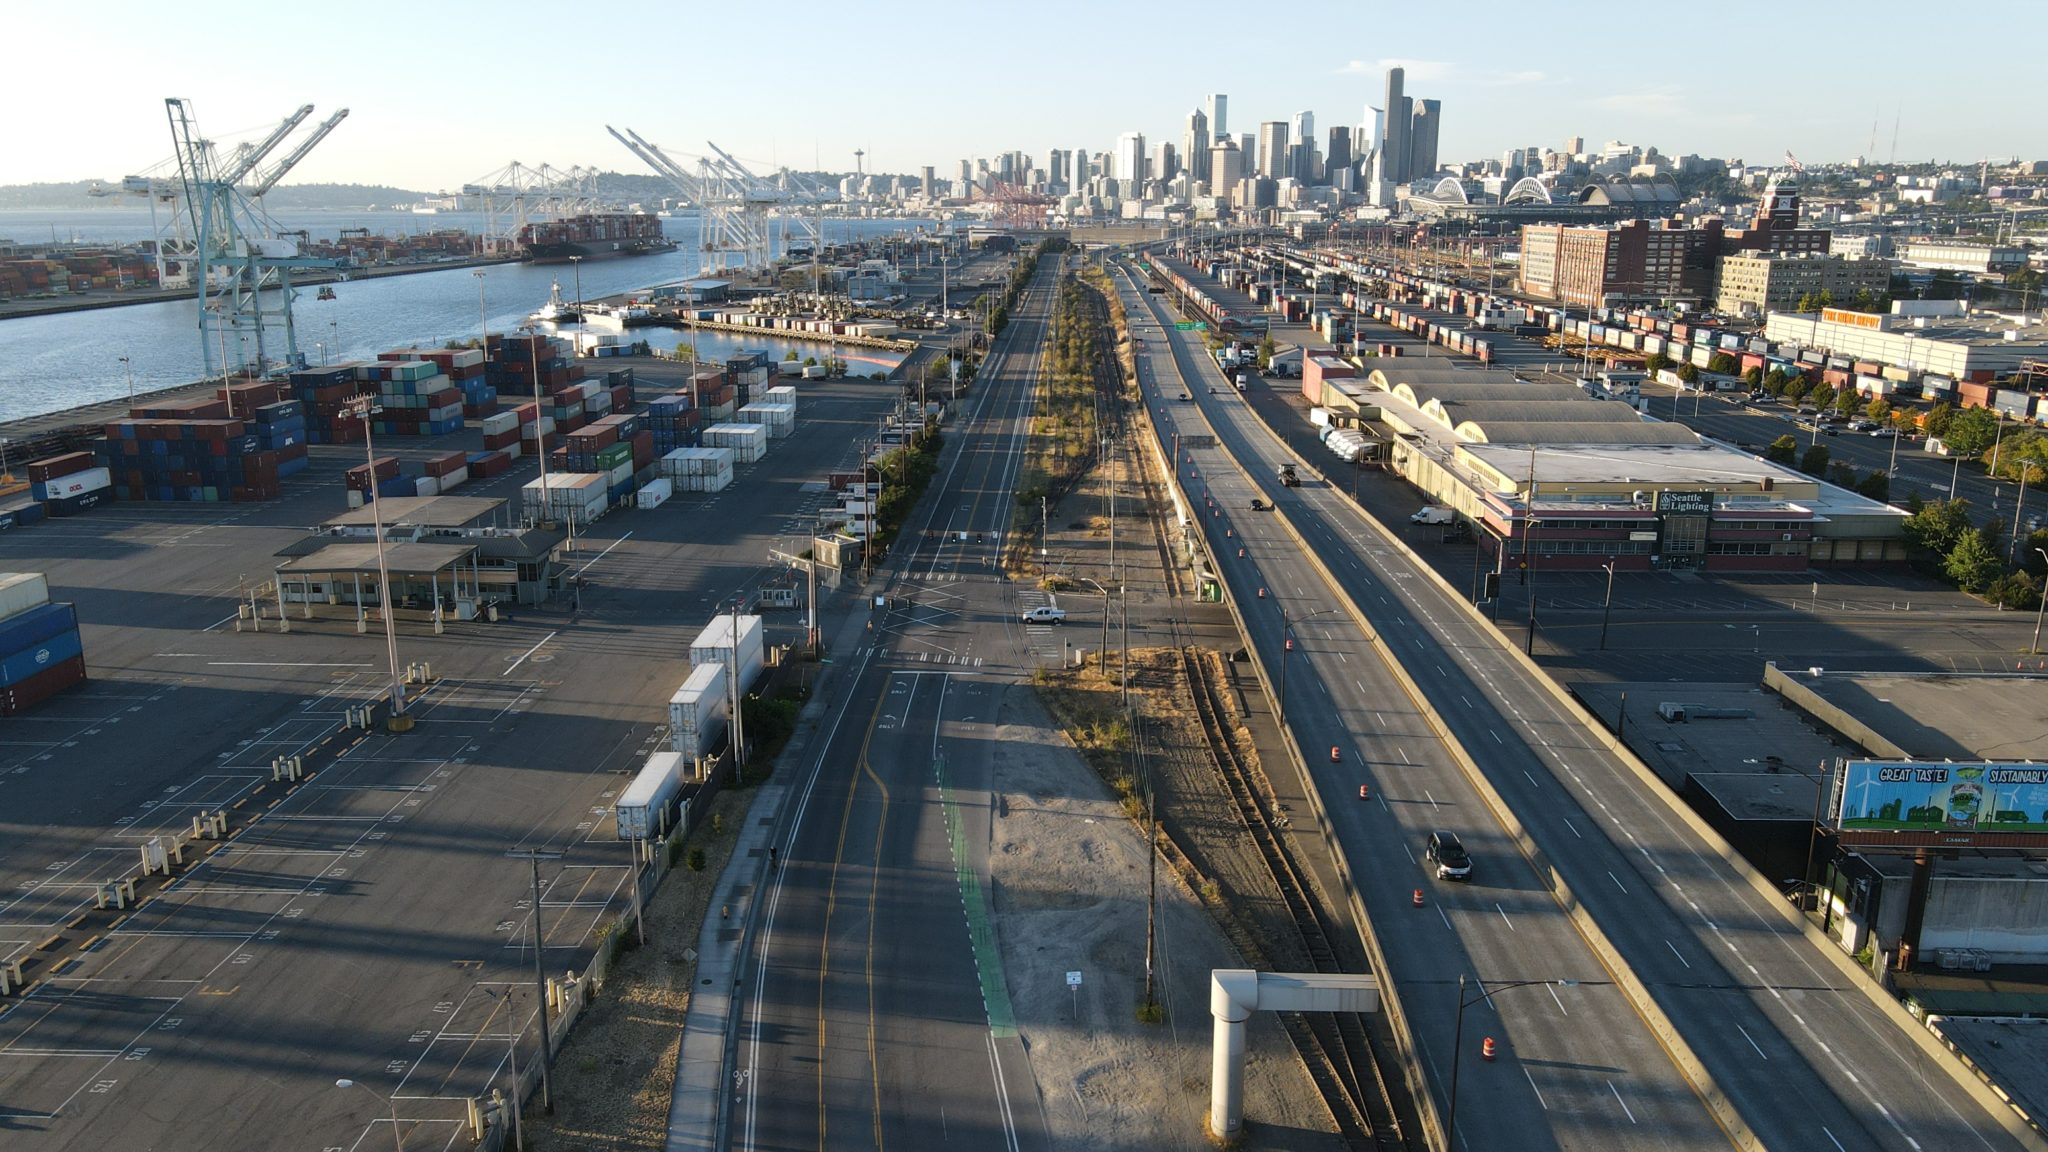 East Marginal Way S. Shows the road and freight.